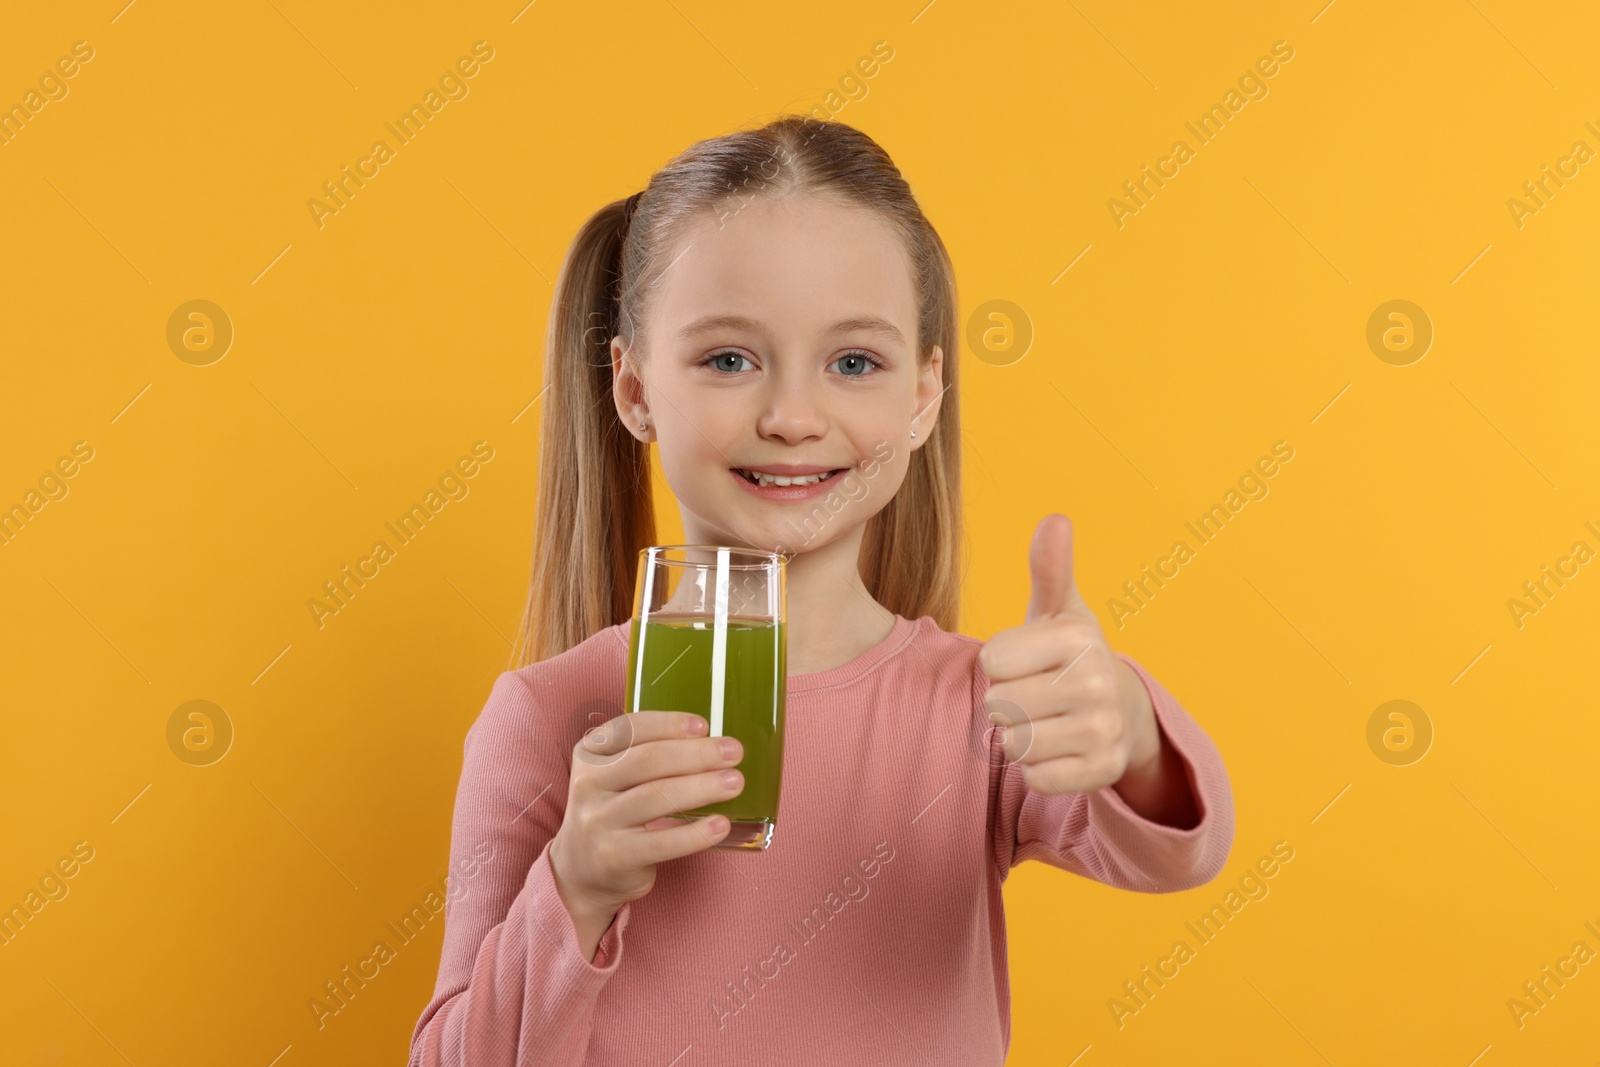 Photo of Cute little girl with glass of fresh juice showing thumbs up on orange background